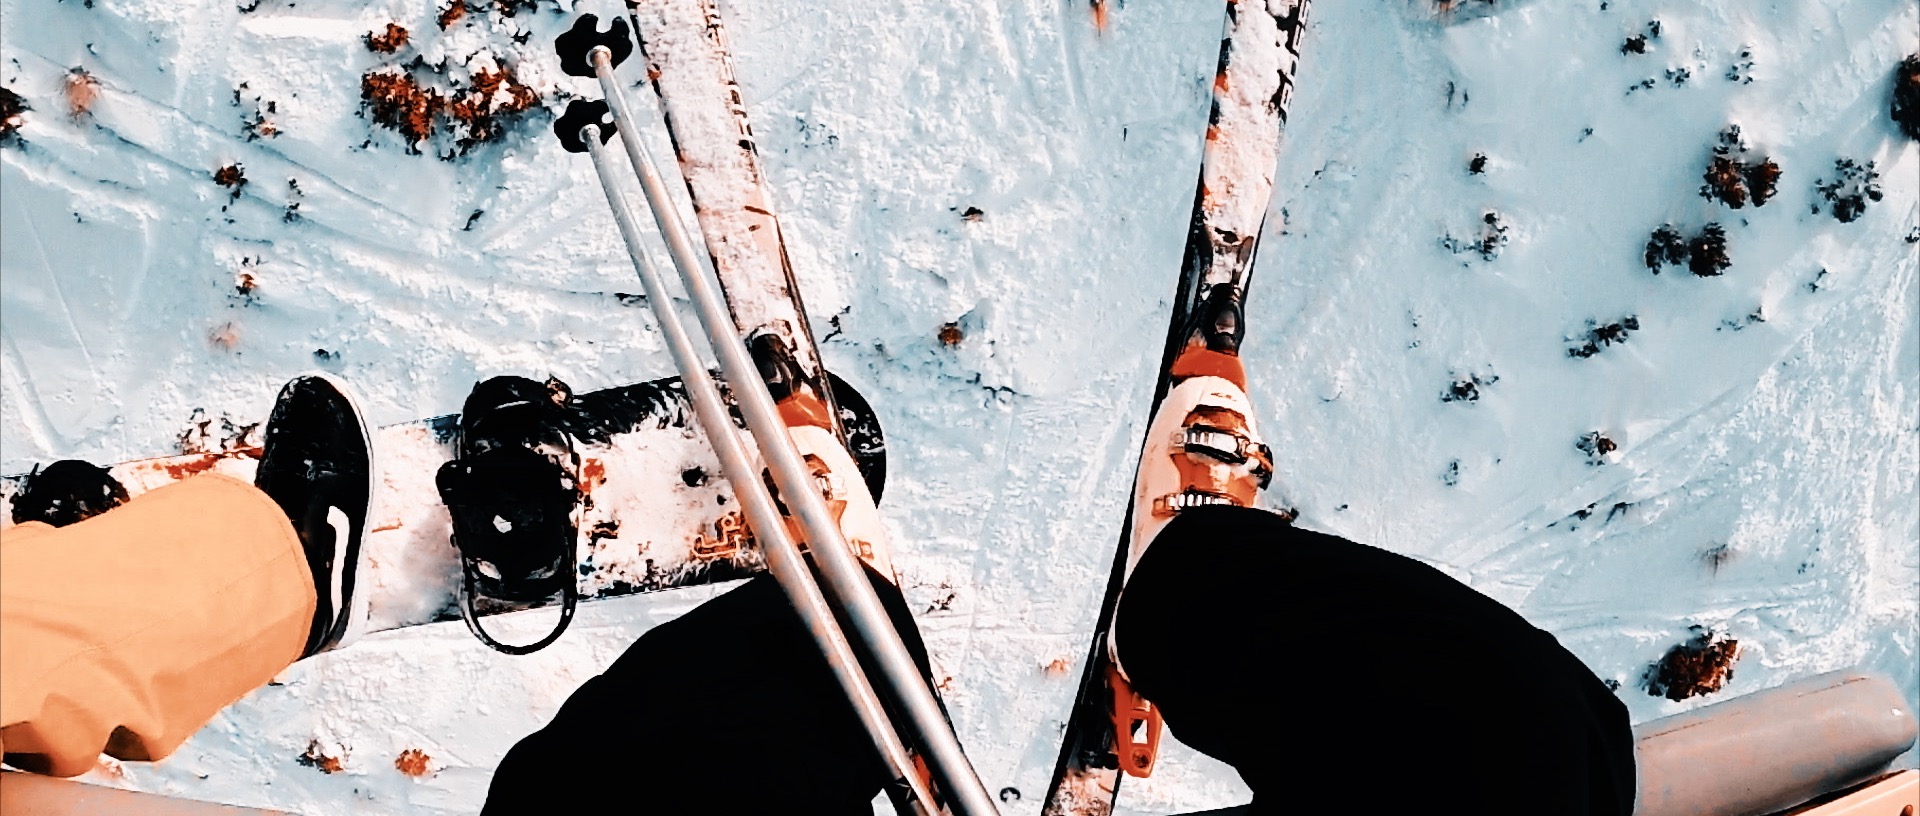 skis on chairlift at cardrona (Queenstown new zealand) shot on GoPro hero black